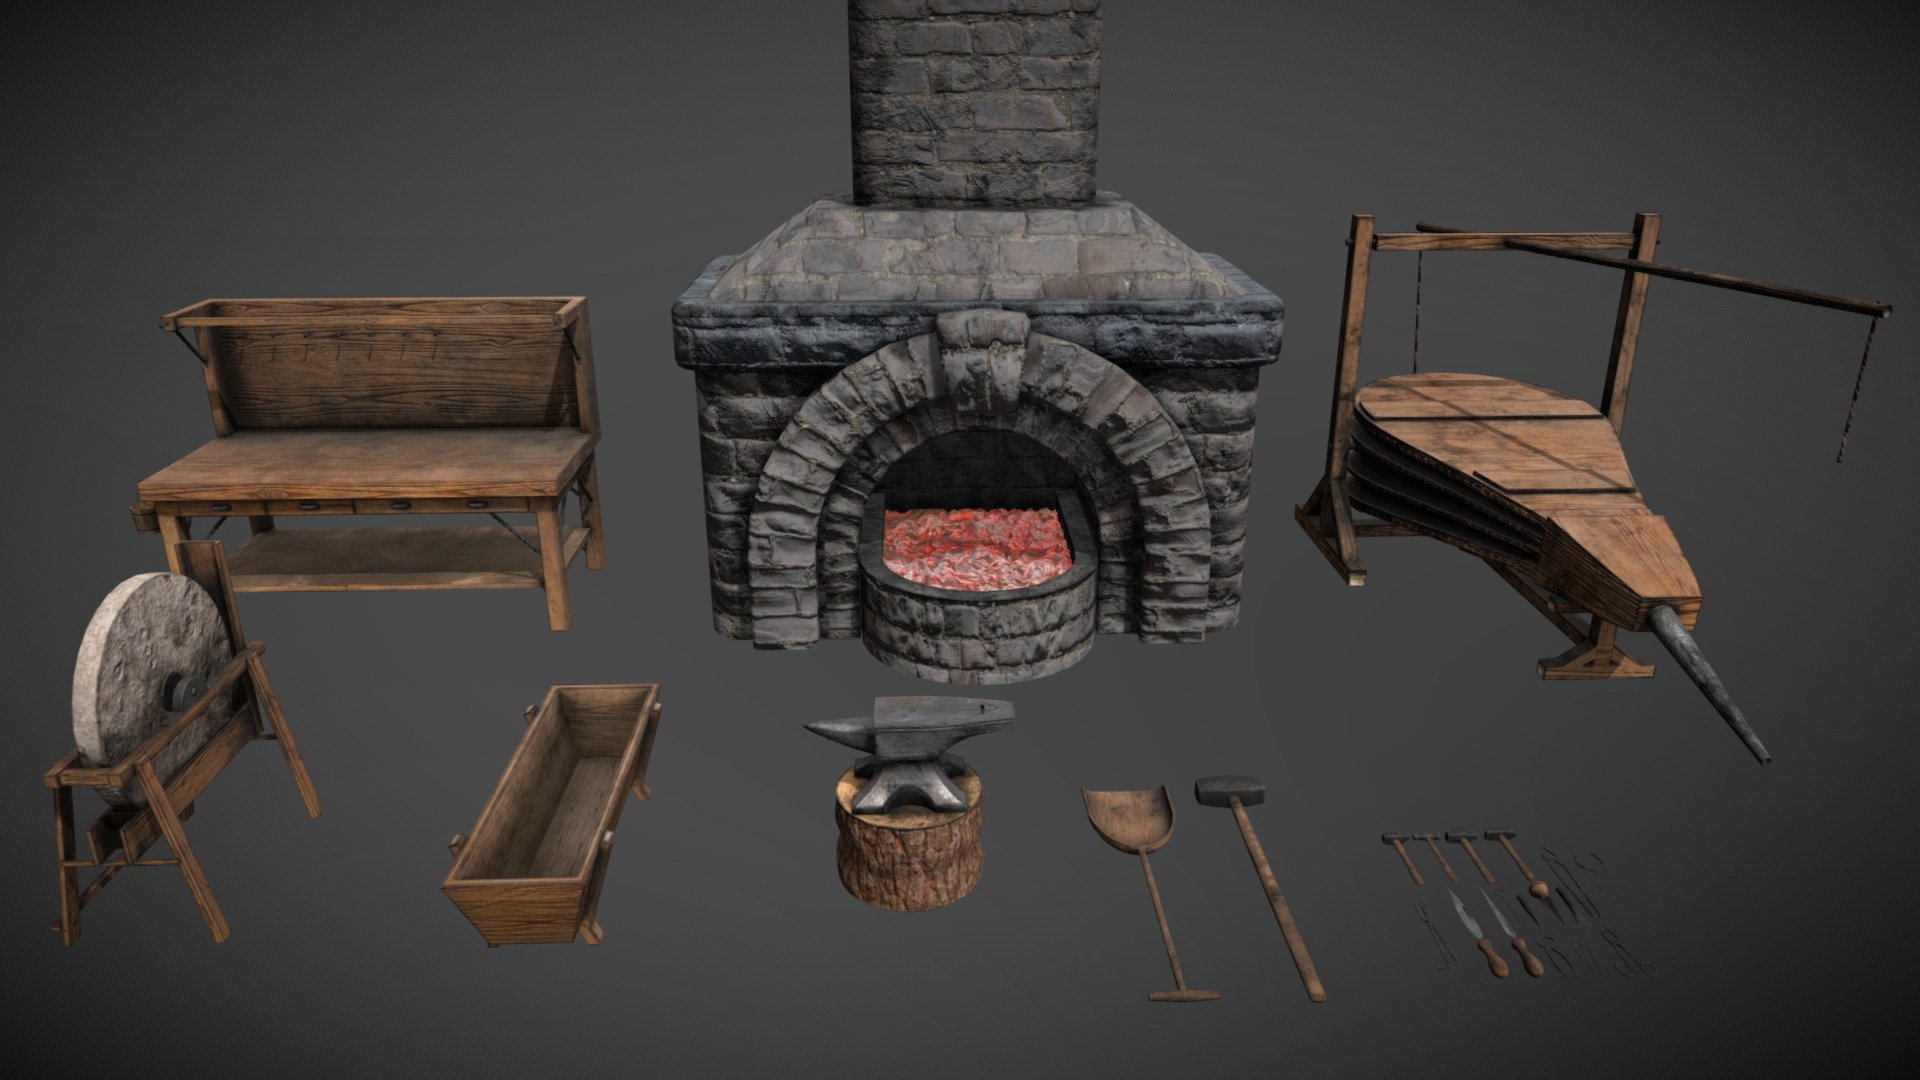 A game ready asset pack containing 25 models themed around medieval a blacksmith's equipment.

Technical information:

Number of meshes: 25

Material slots: 11

Anvil and Stump: 1024x1024, Bellows: 2048x2048, Calipers and Clamps: 1024x1024, Forge: 2048x2048, Grindstone: 2048x2048, Hammers - Small: 1024x1024,Knives and Cutters: 1024x1024, Large Tools: 1024x1024, Pins and Punches: 1024x1024, Quench Trough: 1024x1024, Workbench: 1024x1024

PBR Textures: Yes

Rigged: No - Asset Pack - Blacksmith Equipment - Buy Royalty Free 3D model by Mike Farrant (@MikeFarrant) 3d model